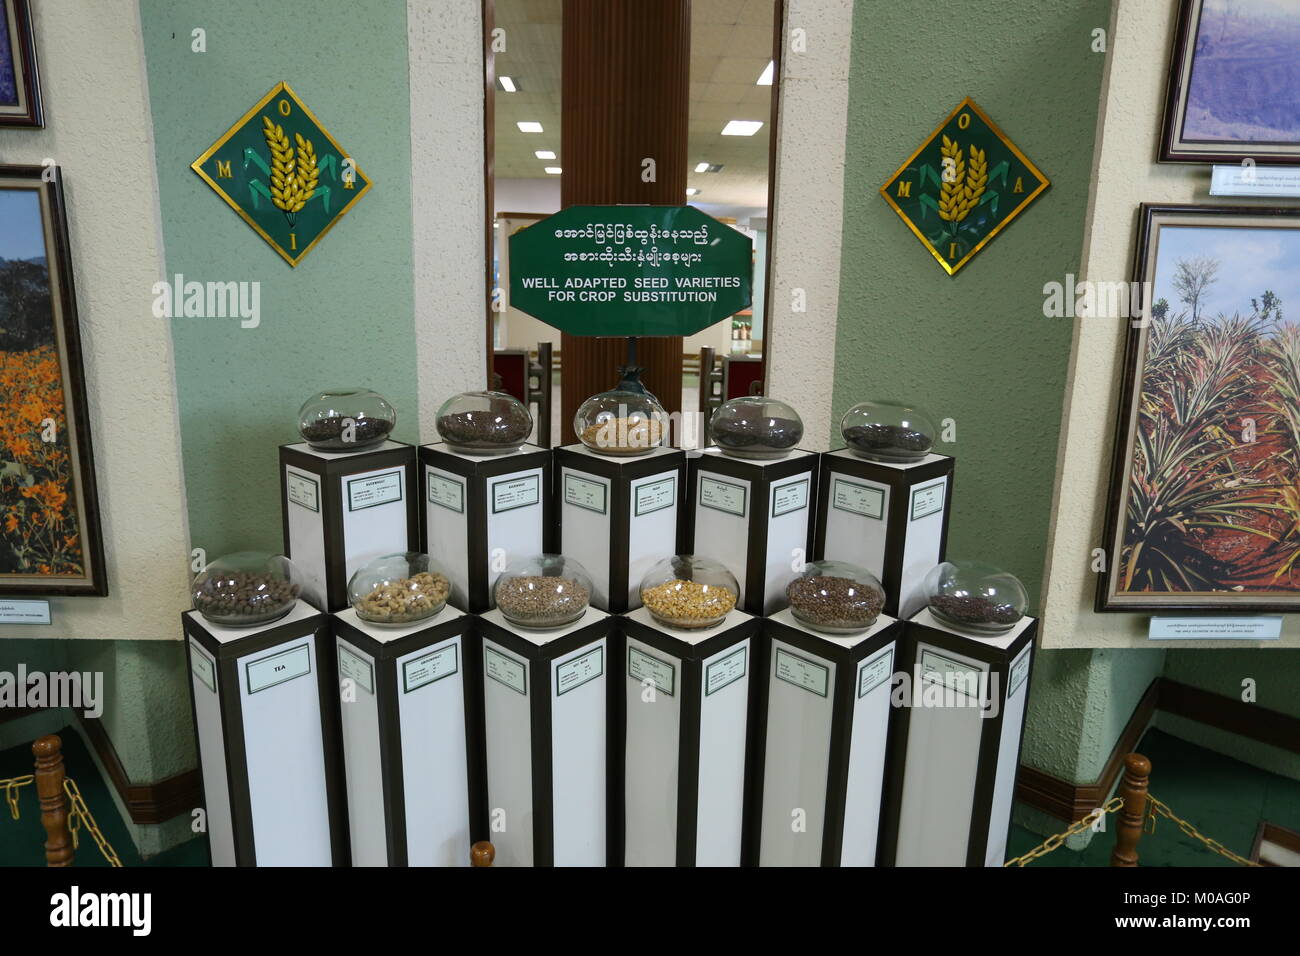 The Drug Elimination Museum in Yangon is filled with displays warning of the dangers and risks of drug addiction. Stock Photo